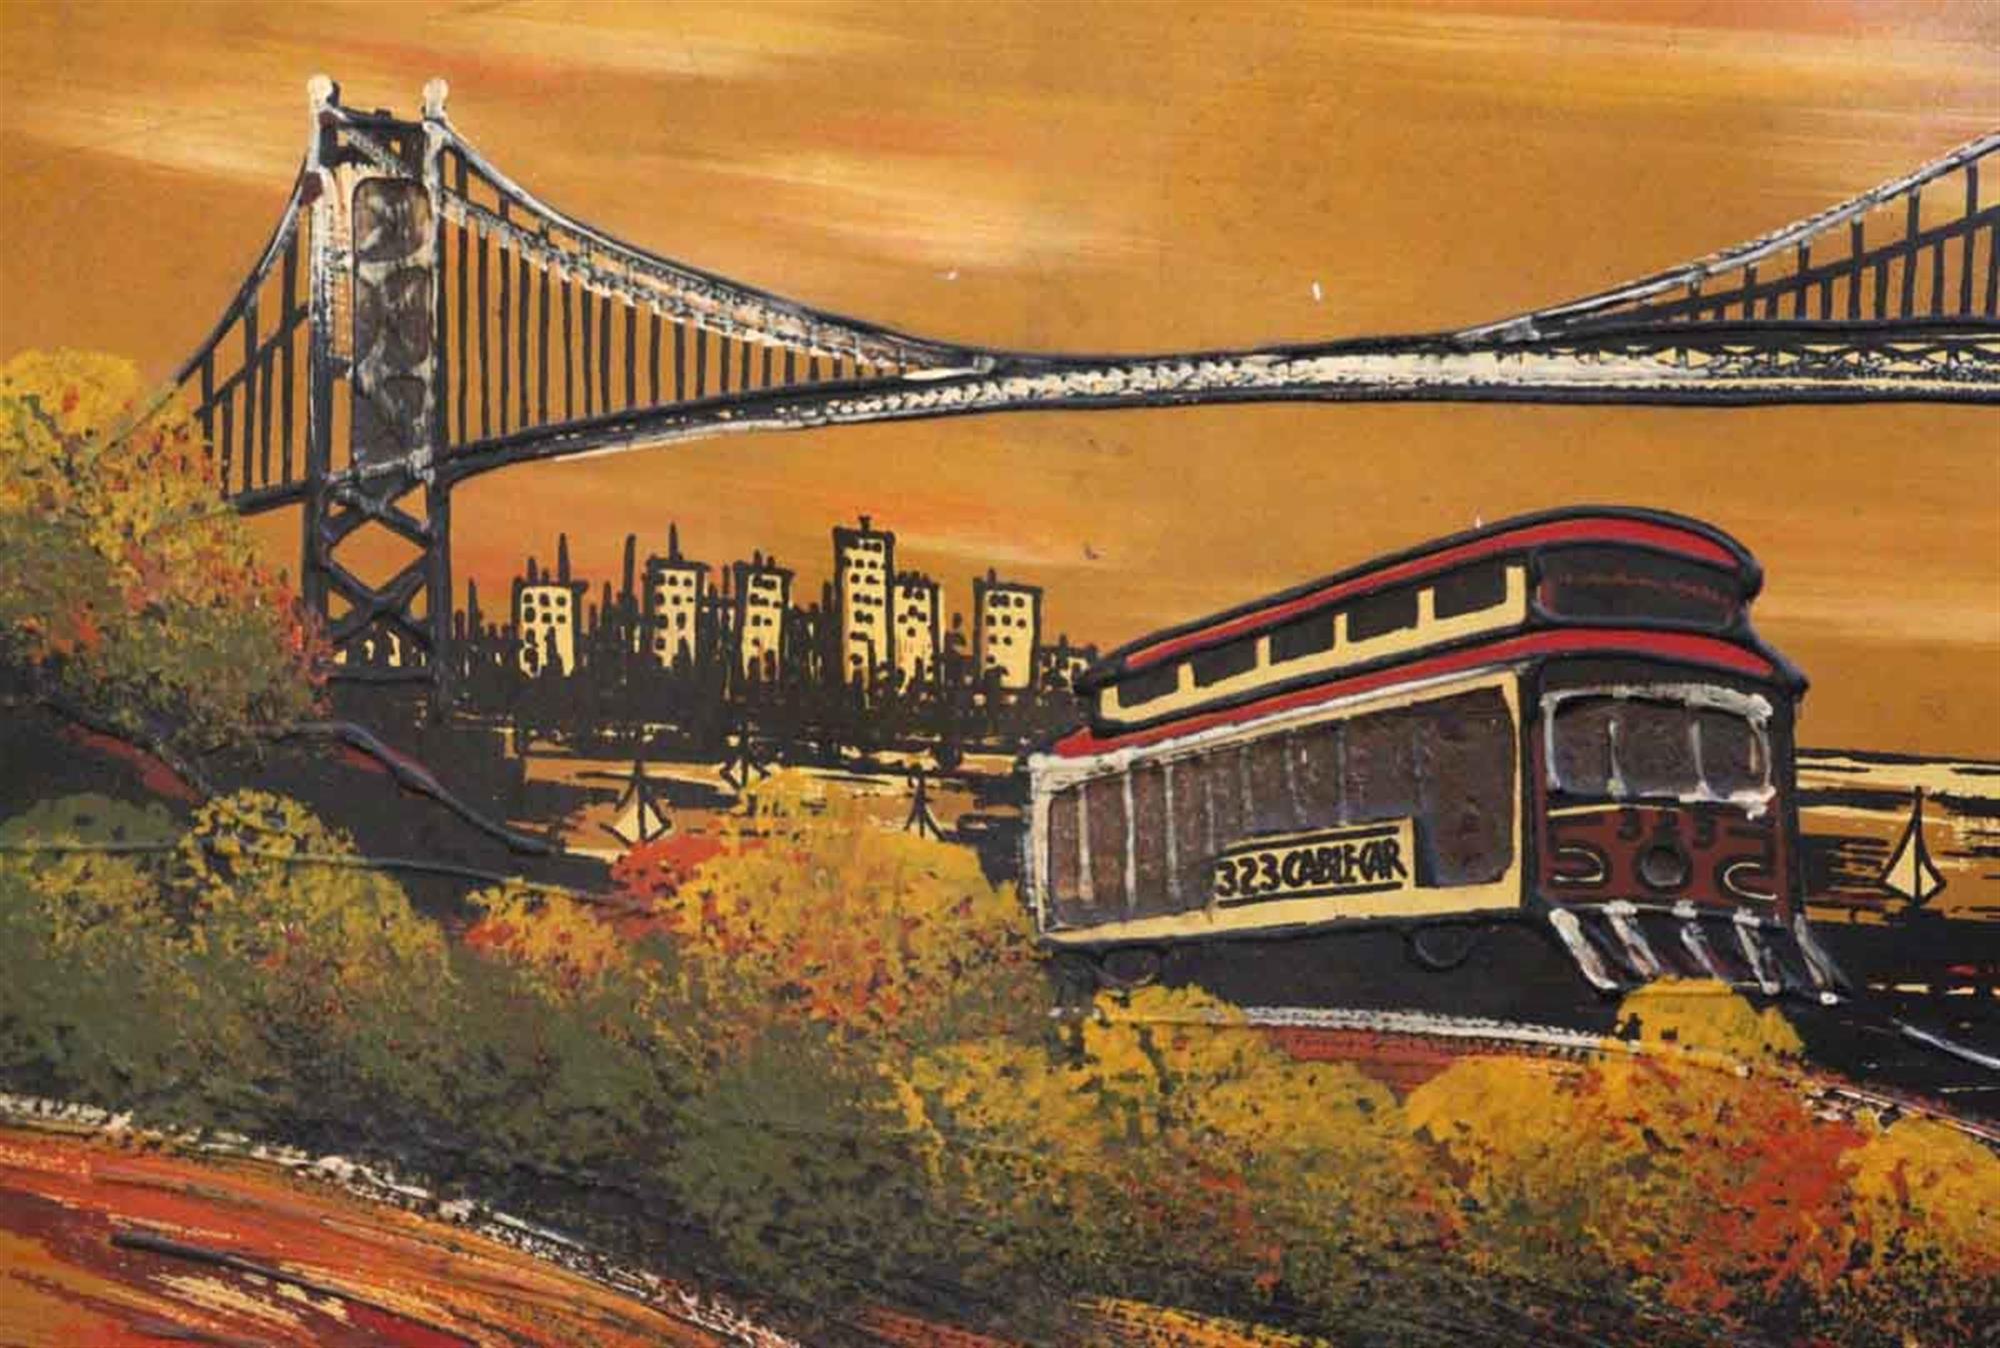 Original signed mixed-media golden gate bridge painting with oriental details by Ashbrook Studios in San Francisco, CA from the 1990s. This can be seen at our 5 East 16th St location on Union Square in Manhattan.